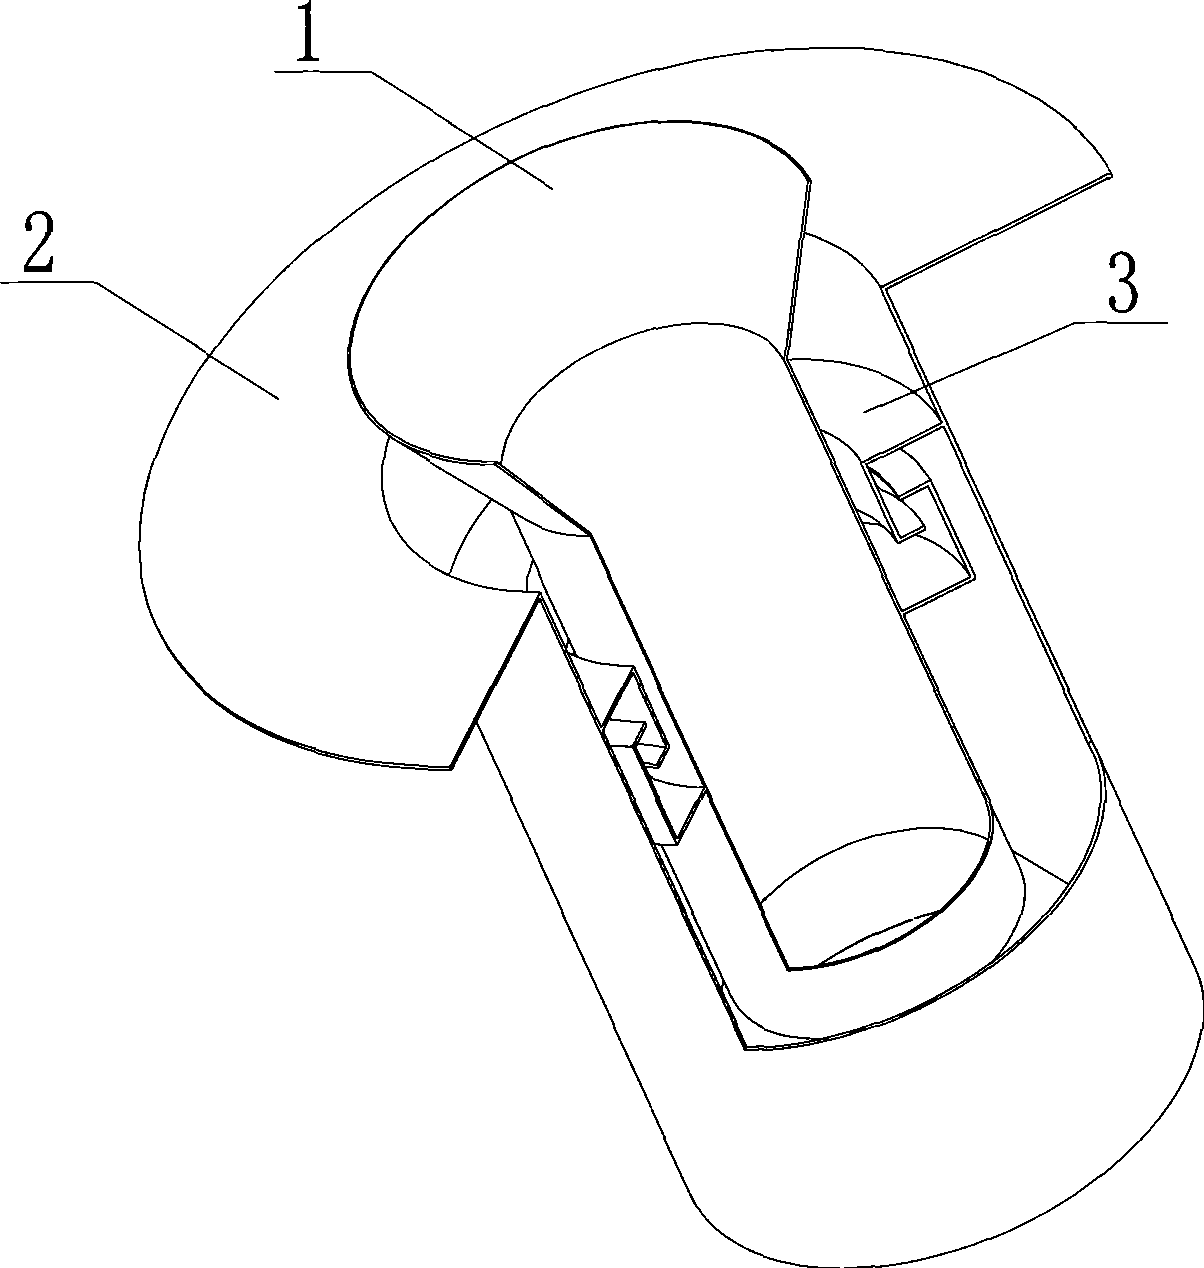 Liquid surface sealing of clip-shaped slot structure